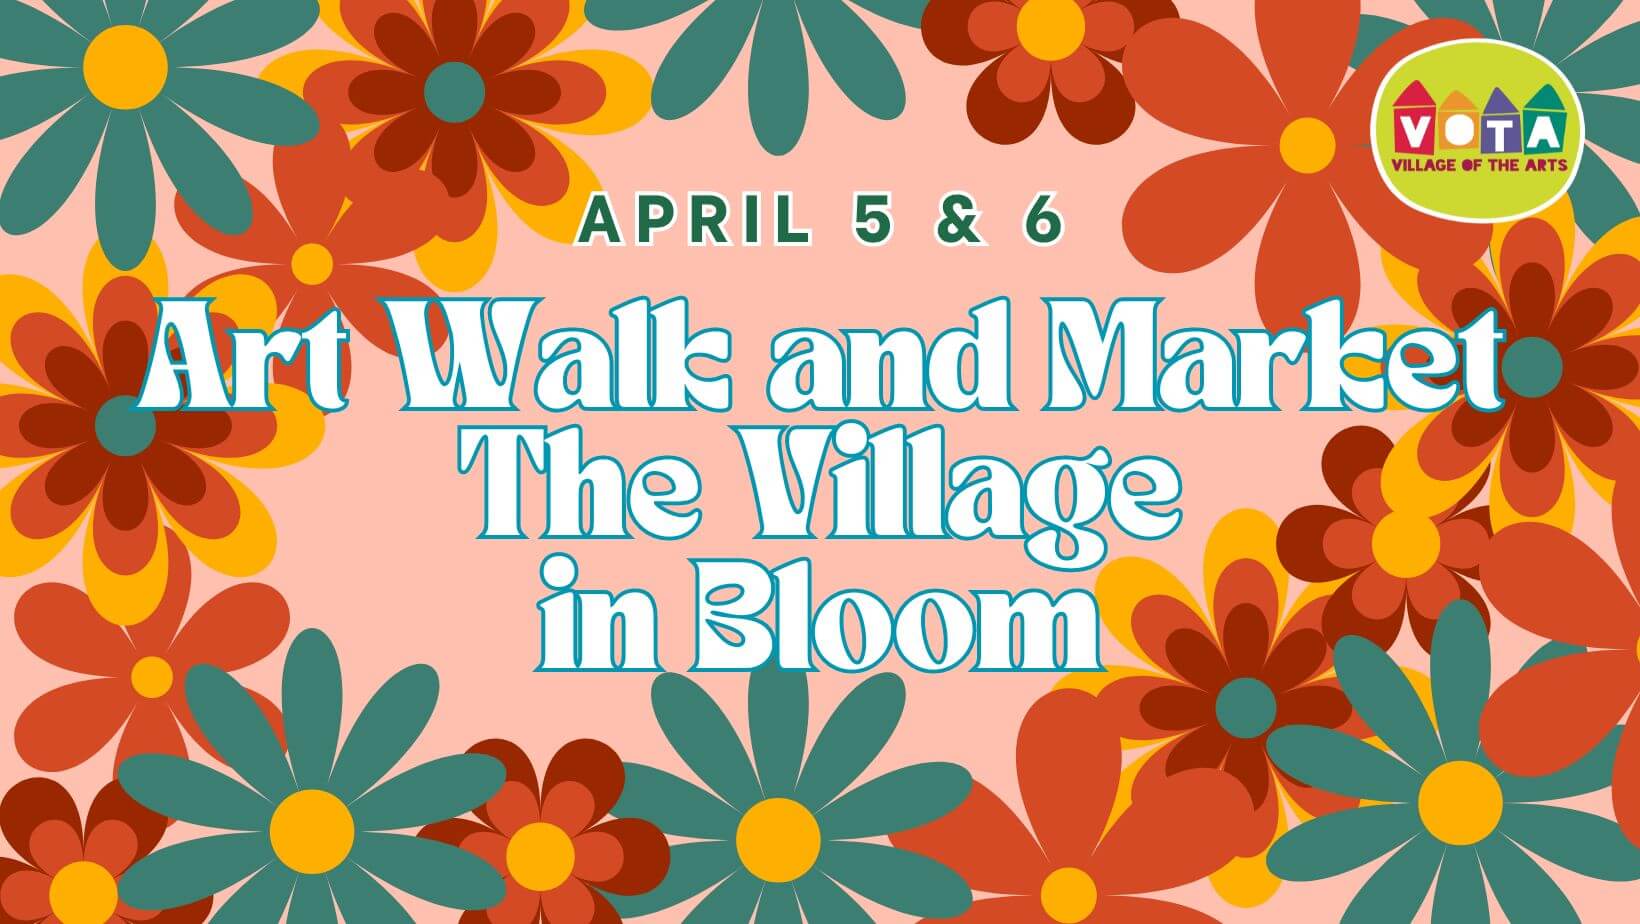 floral graphic for Artwalk and Market: The Village in Bloom event